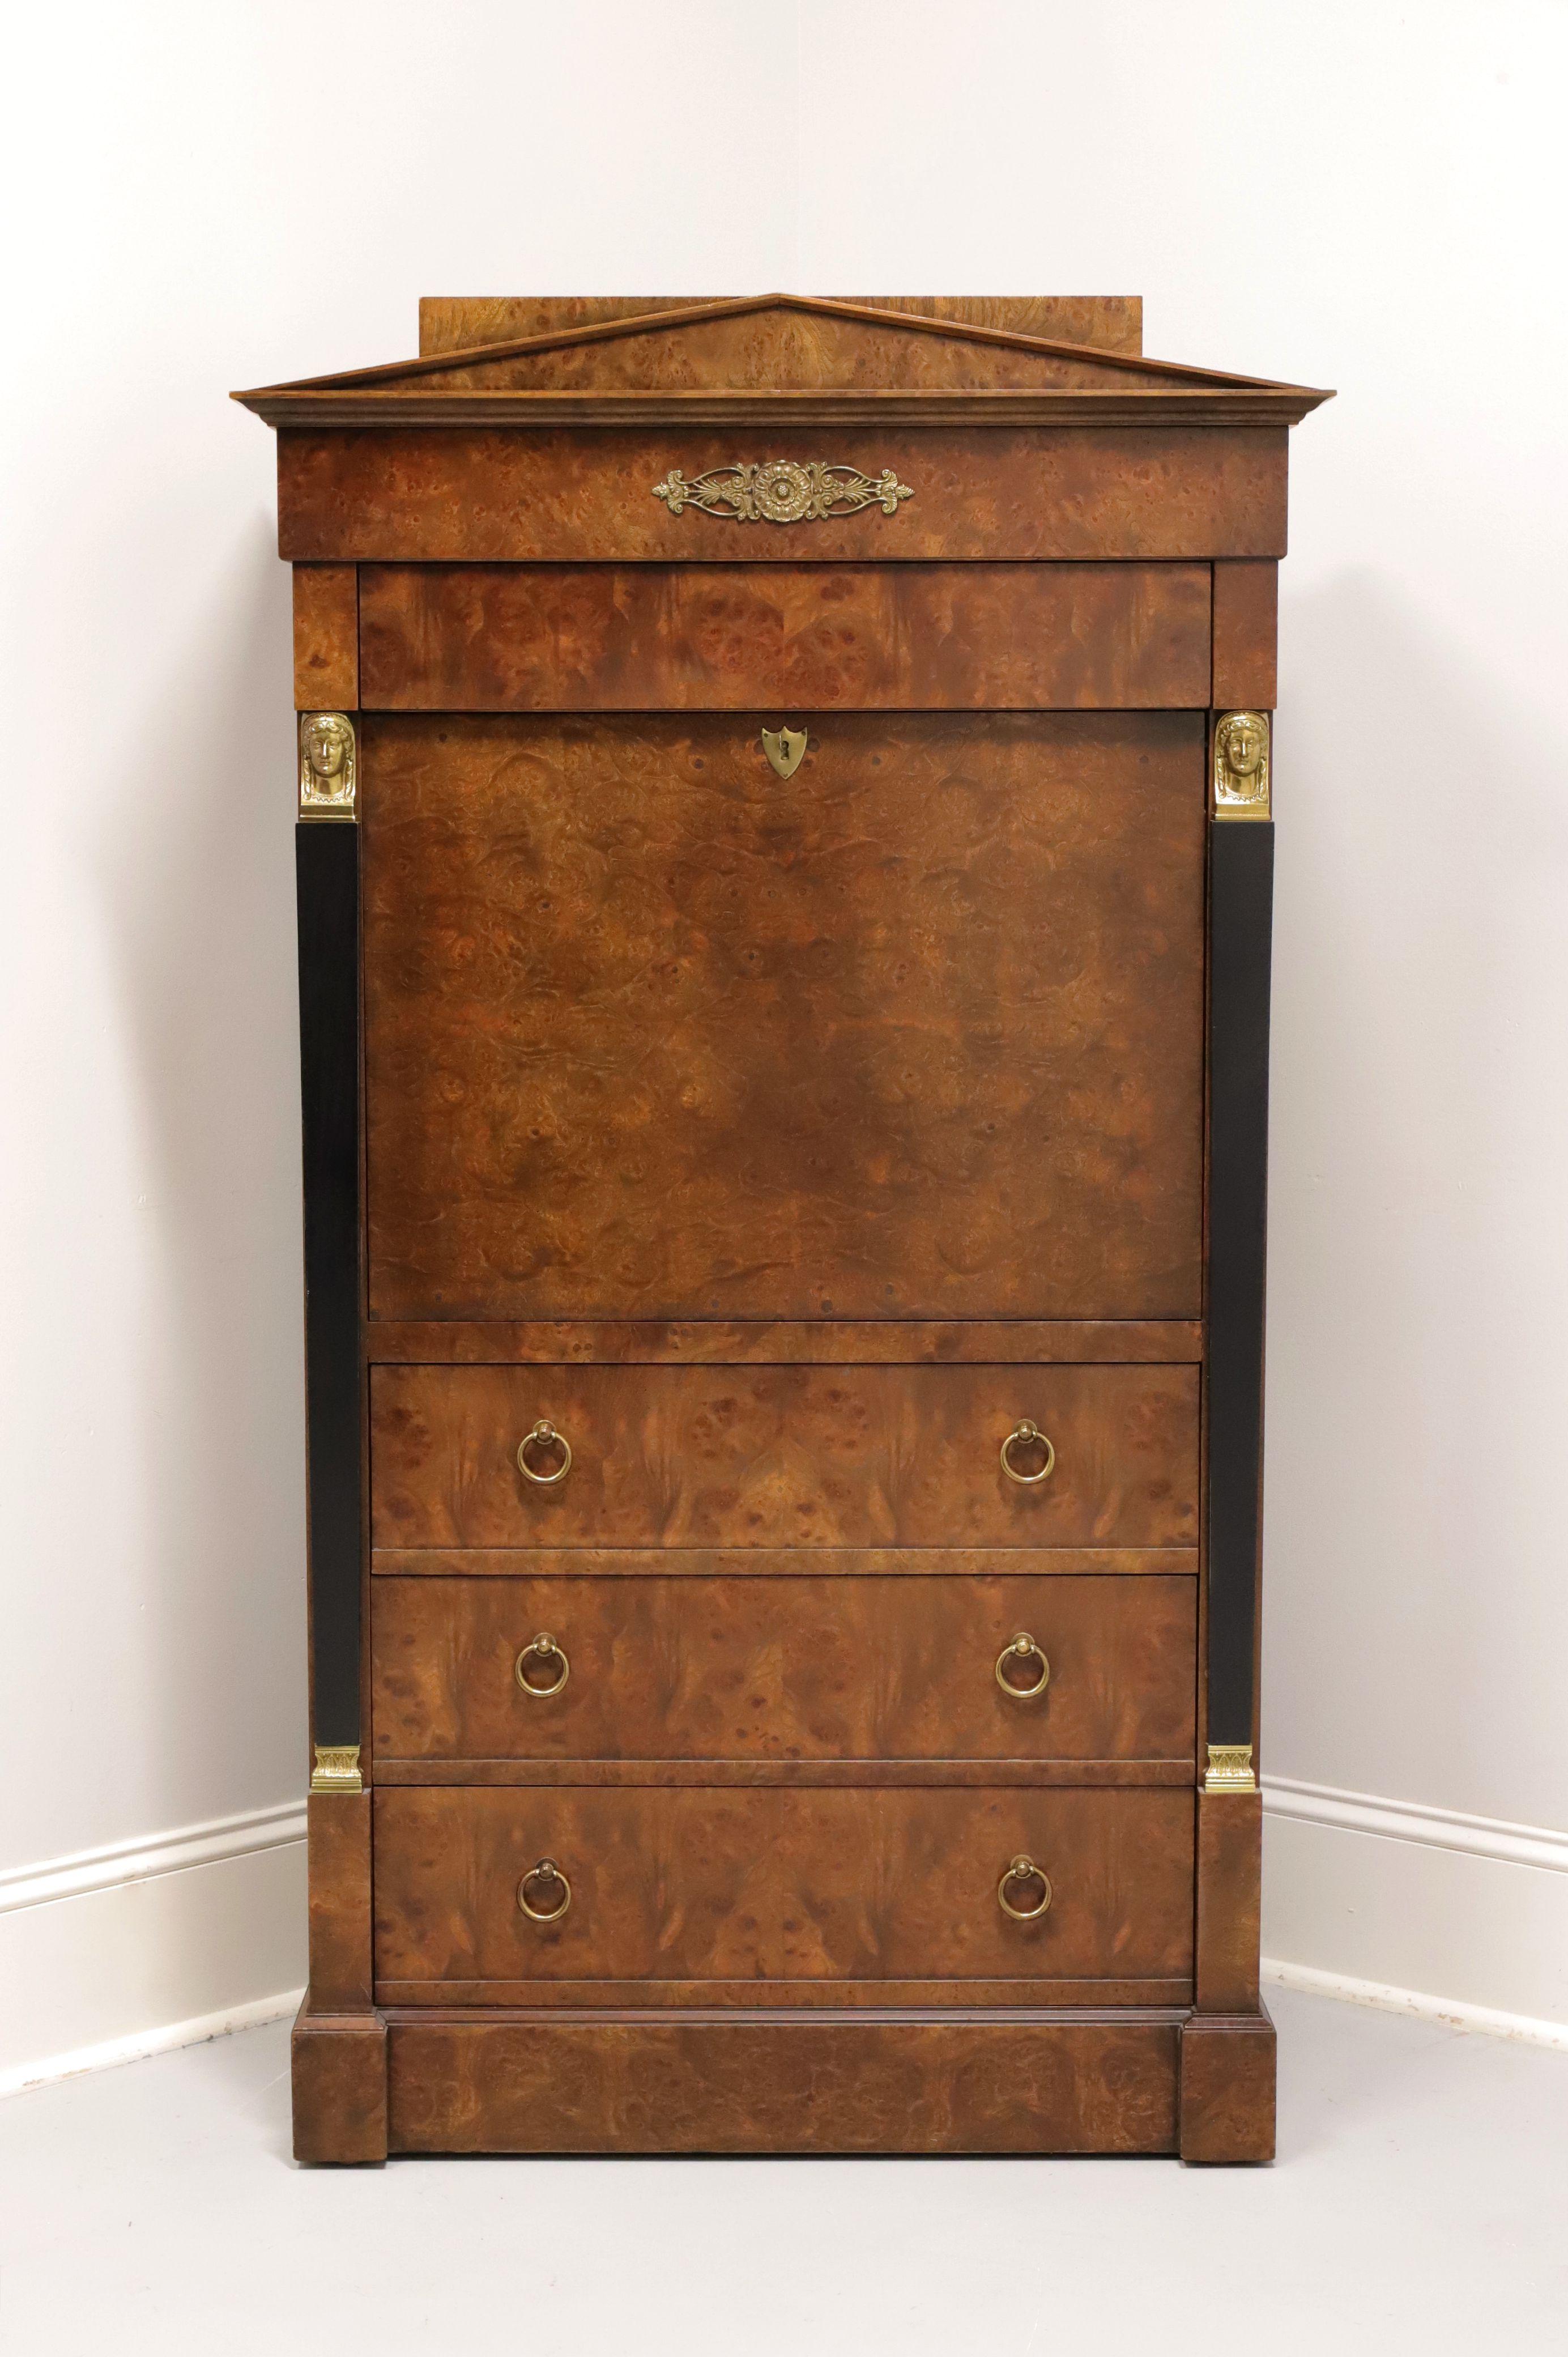 A French Regency style abatante secretary desk by Baker Furniture. Burl walnut with brass hardware, black painted side & interior columns, brass ornamentation to entablature & side columns, pediment top, and solid base. Upper section has one drawer